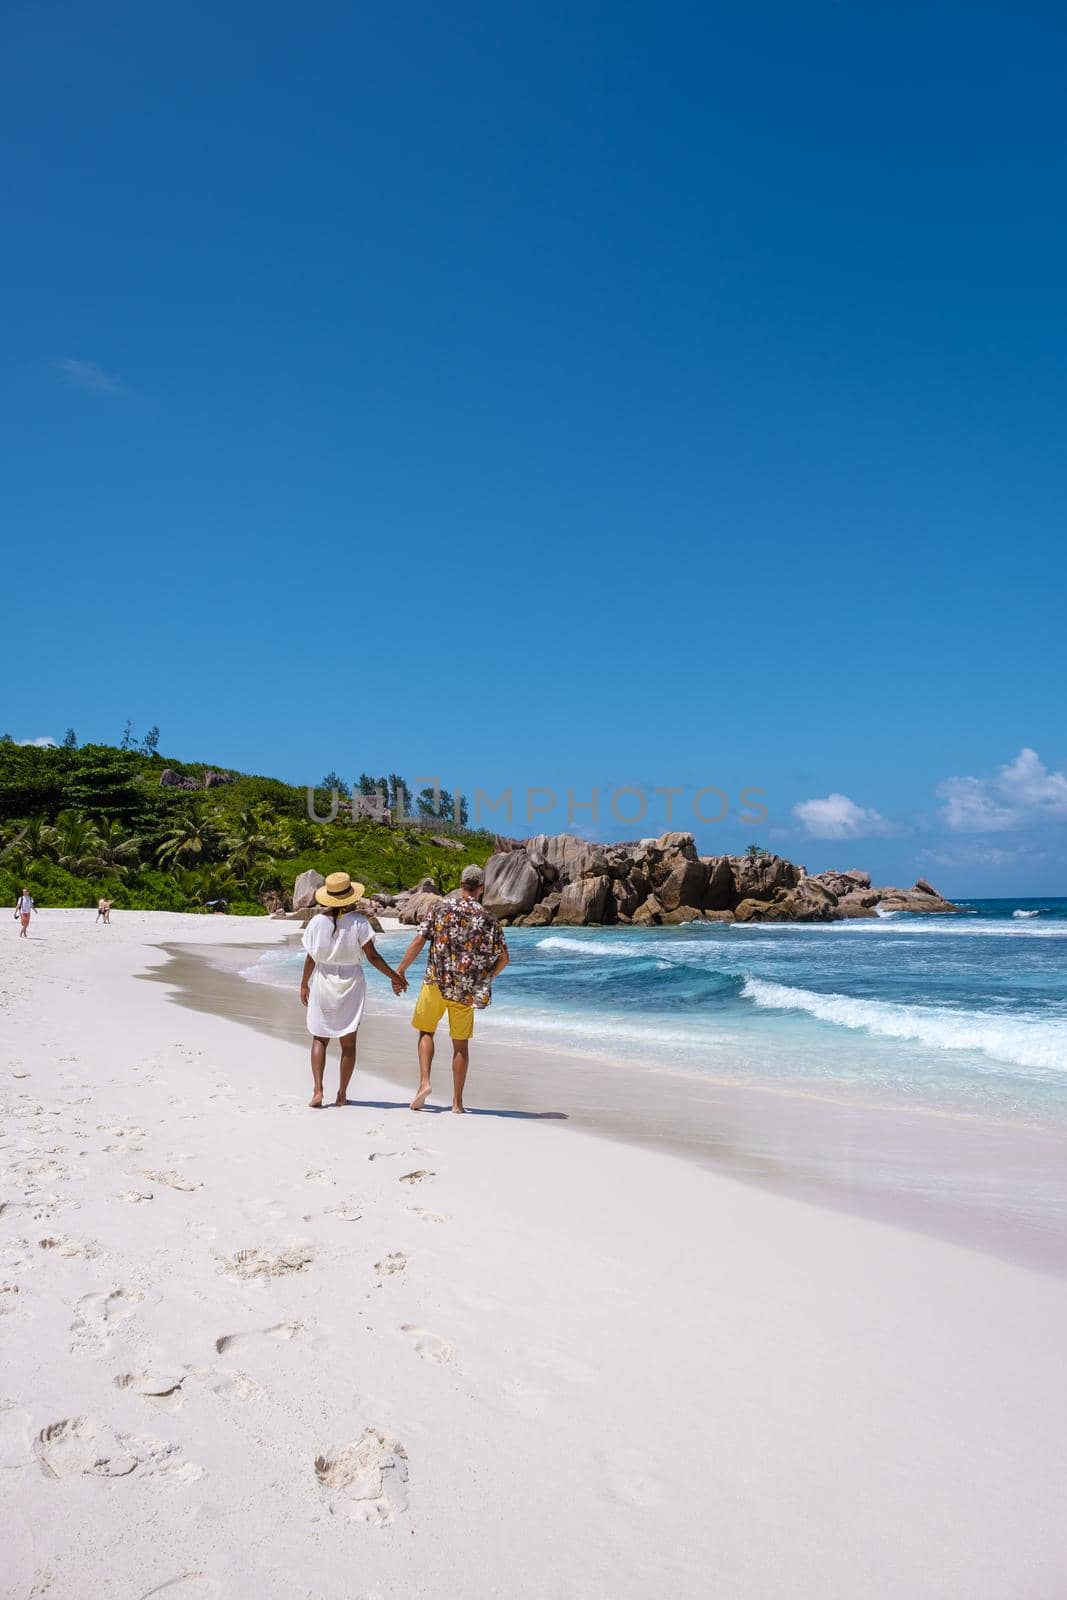 Anse Cocos La Digue Seychelles, young couple men and woman on a tropical beach during a luxury vacation in the Seychelles. Tropical beach Anse Cocos La Digue Seychelles by fokkebok